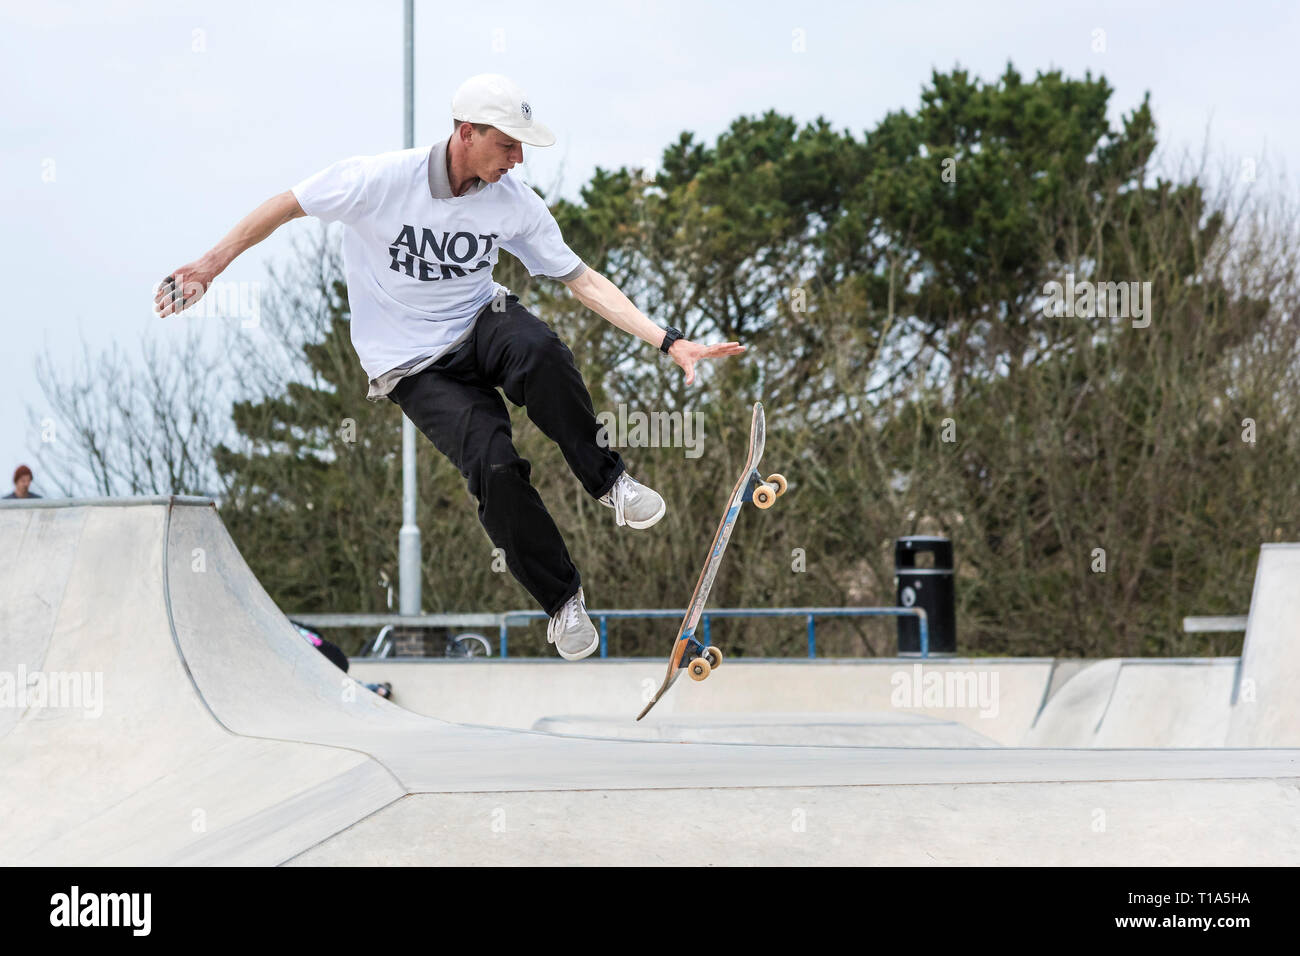 A skateboarder attempting an aerial trick at Concrete Waves Skateboard Park in Newqay in Cornwall. Stock Photo